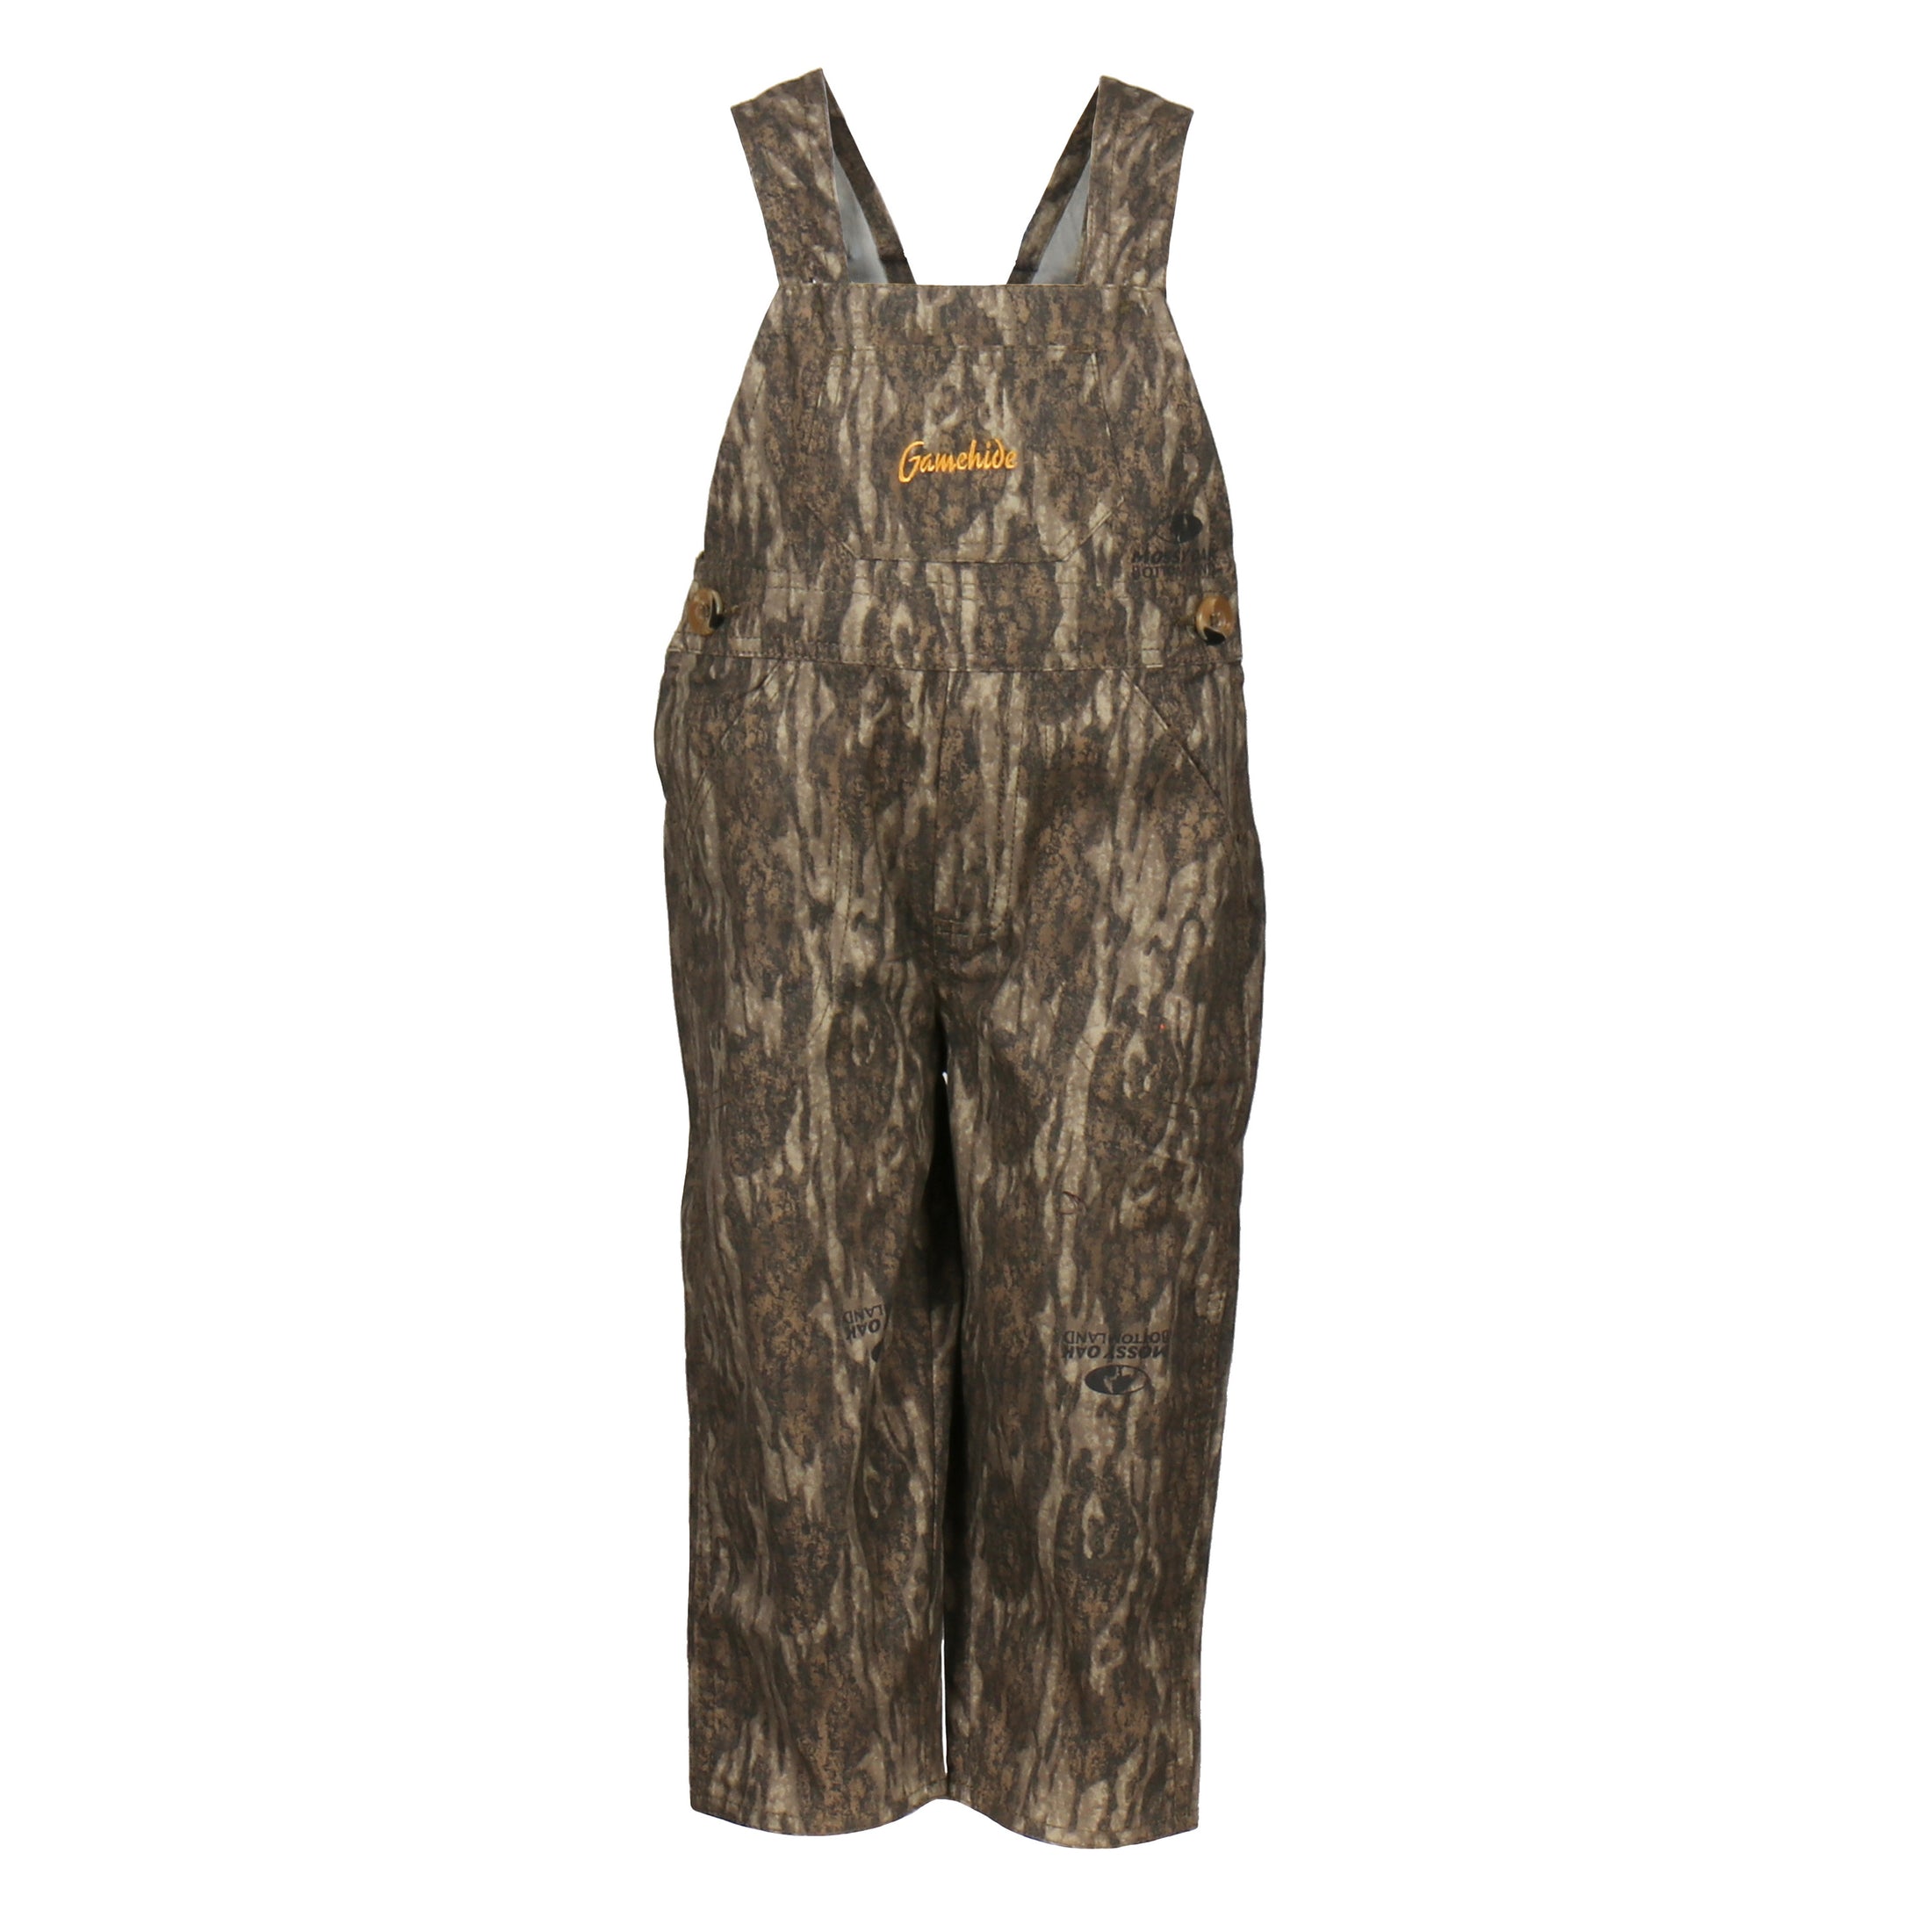 gamehide toddler cotton overall (mossy oak new bottomland)